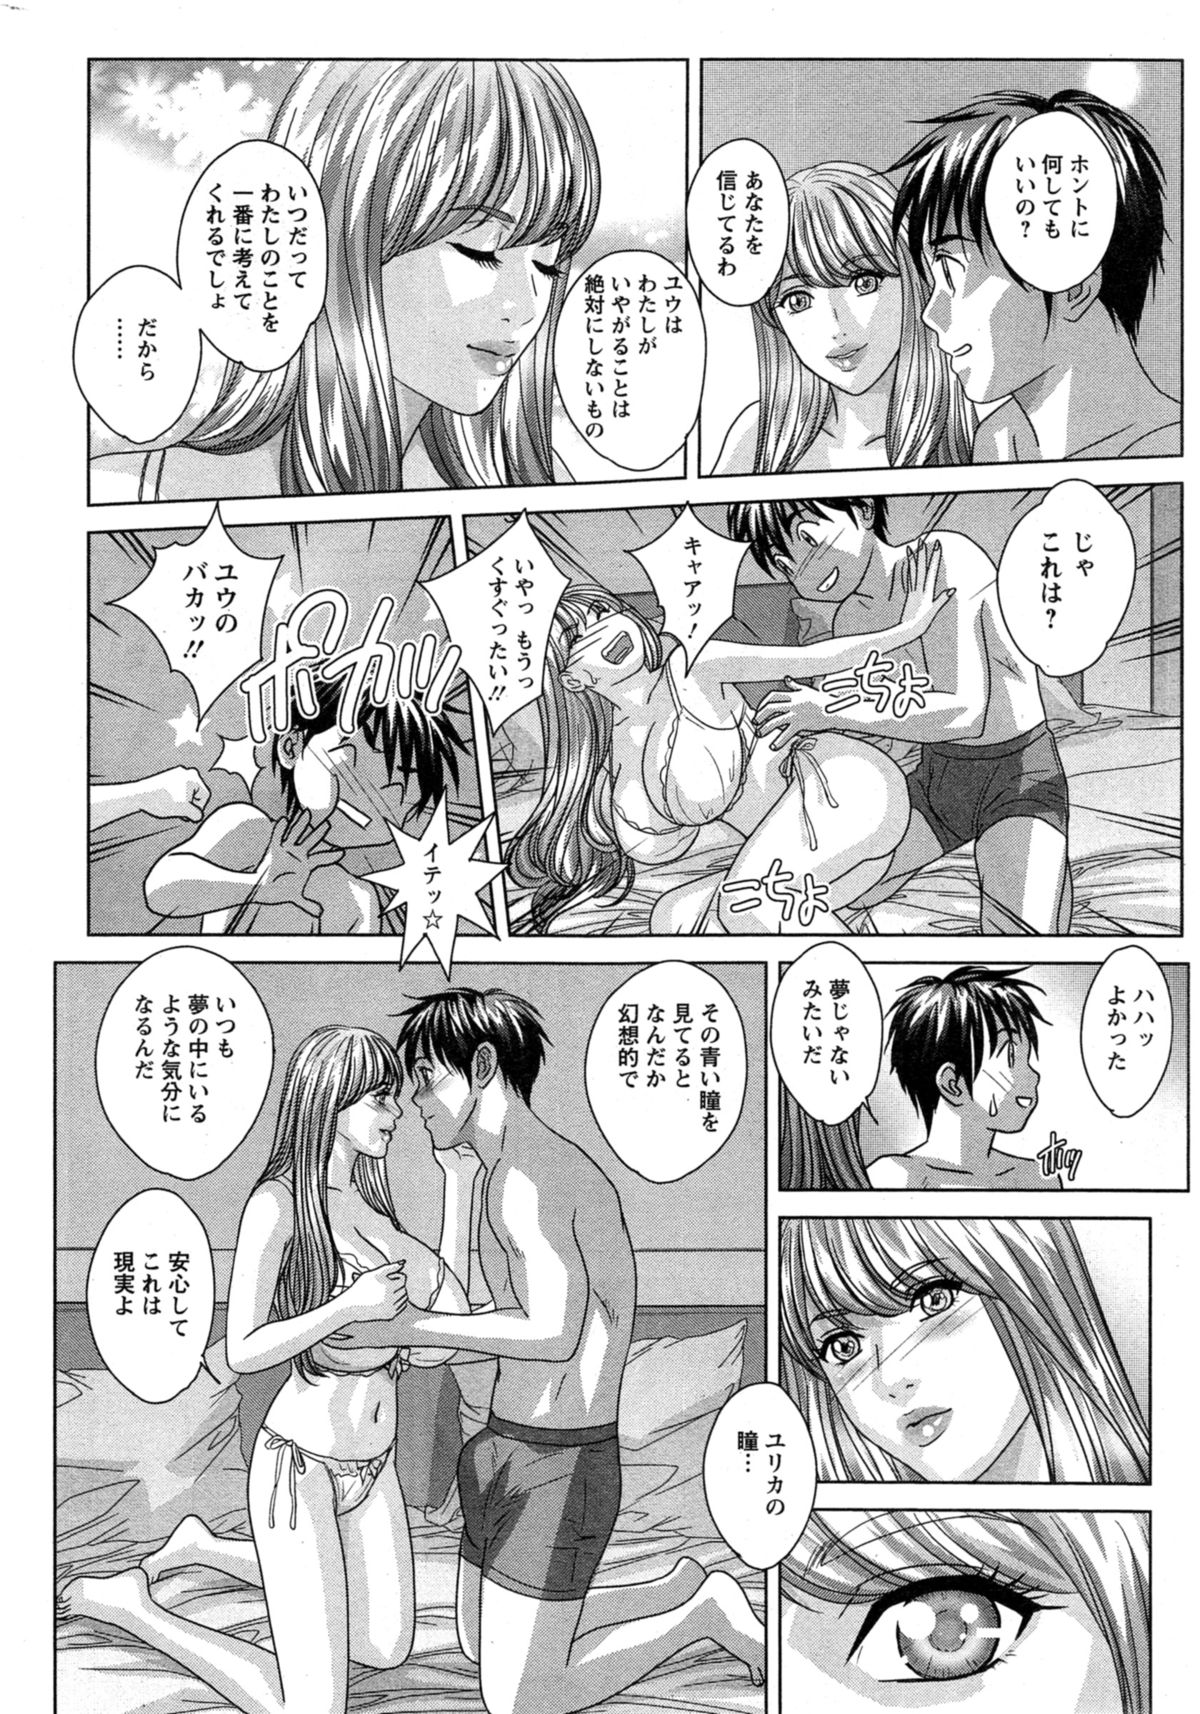 Action Pizazz 2014-11 page 20 full